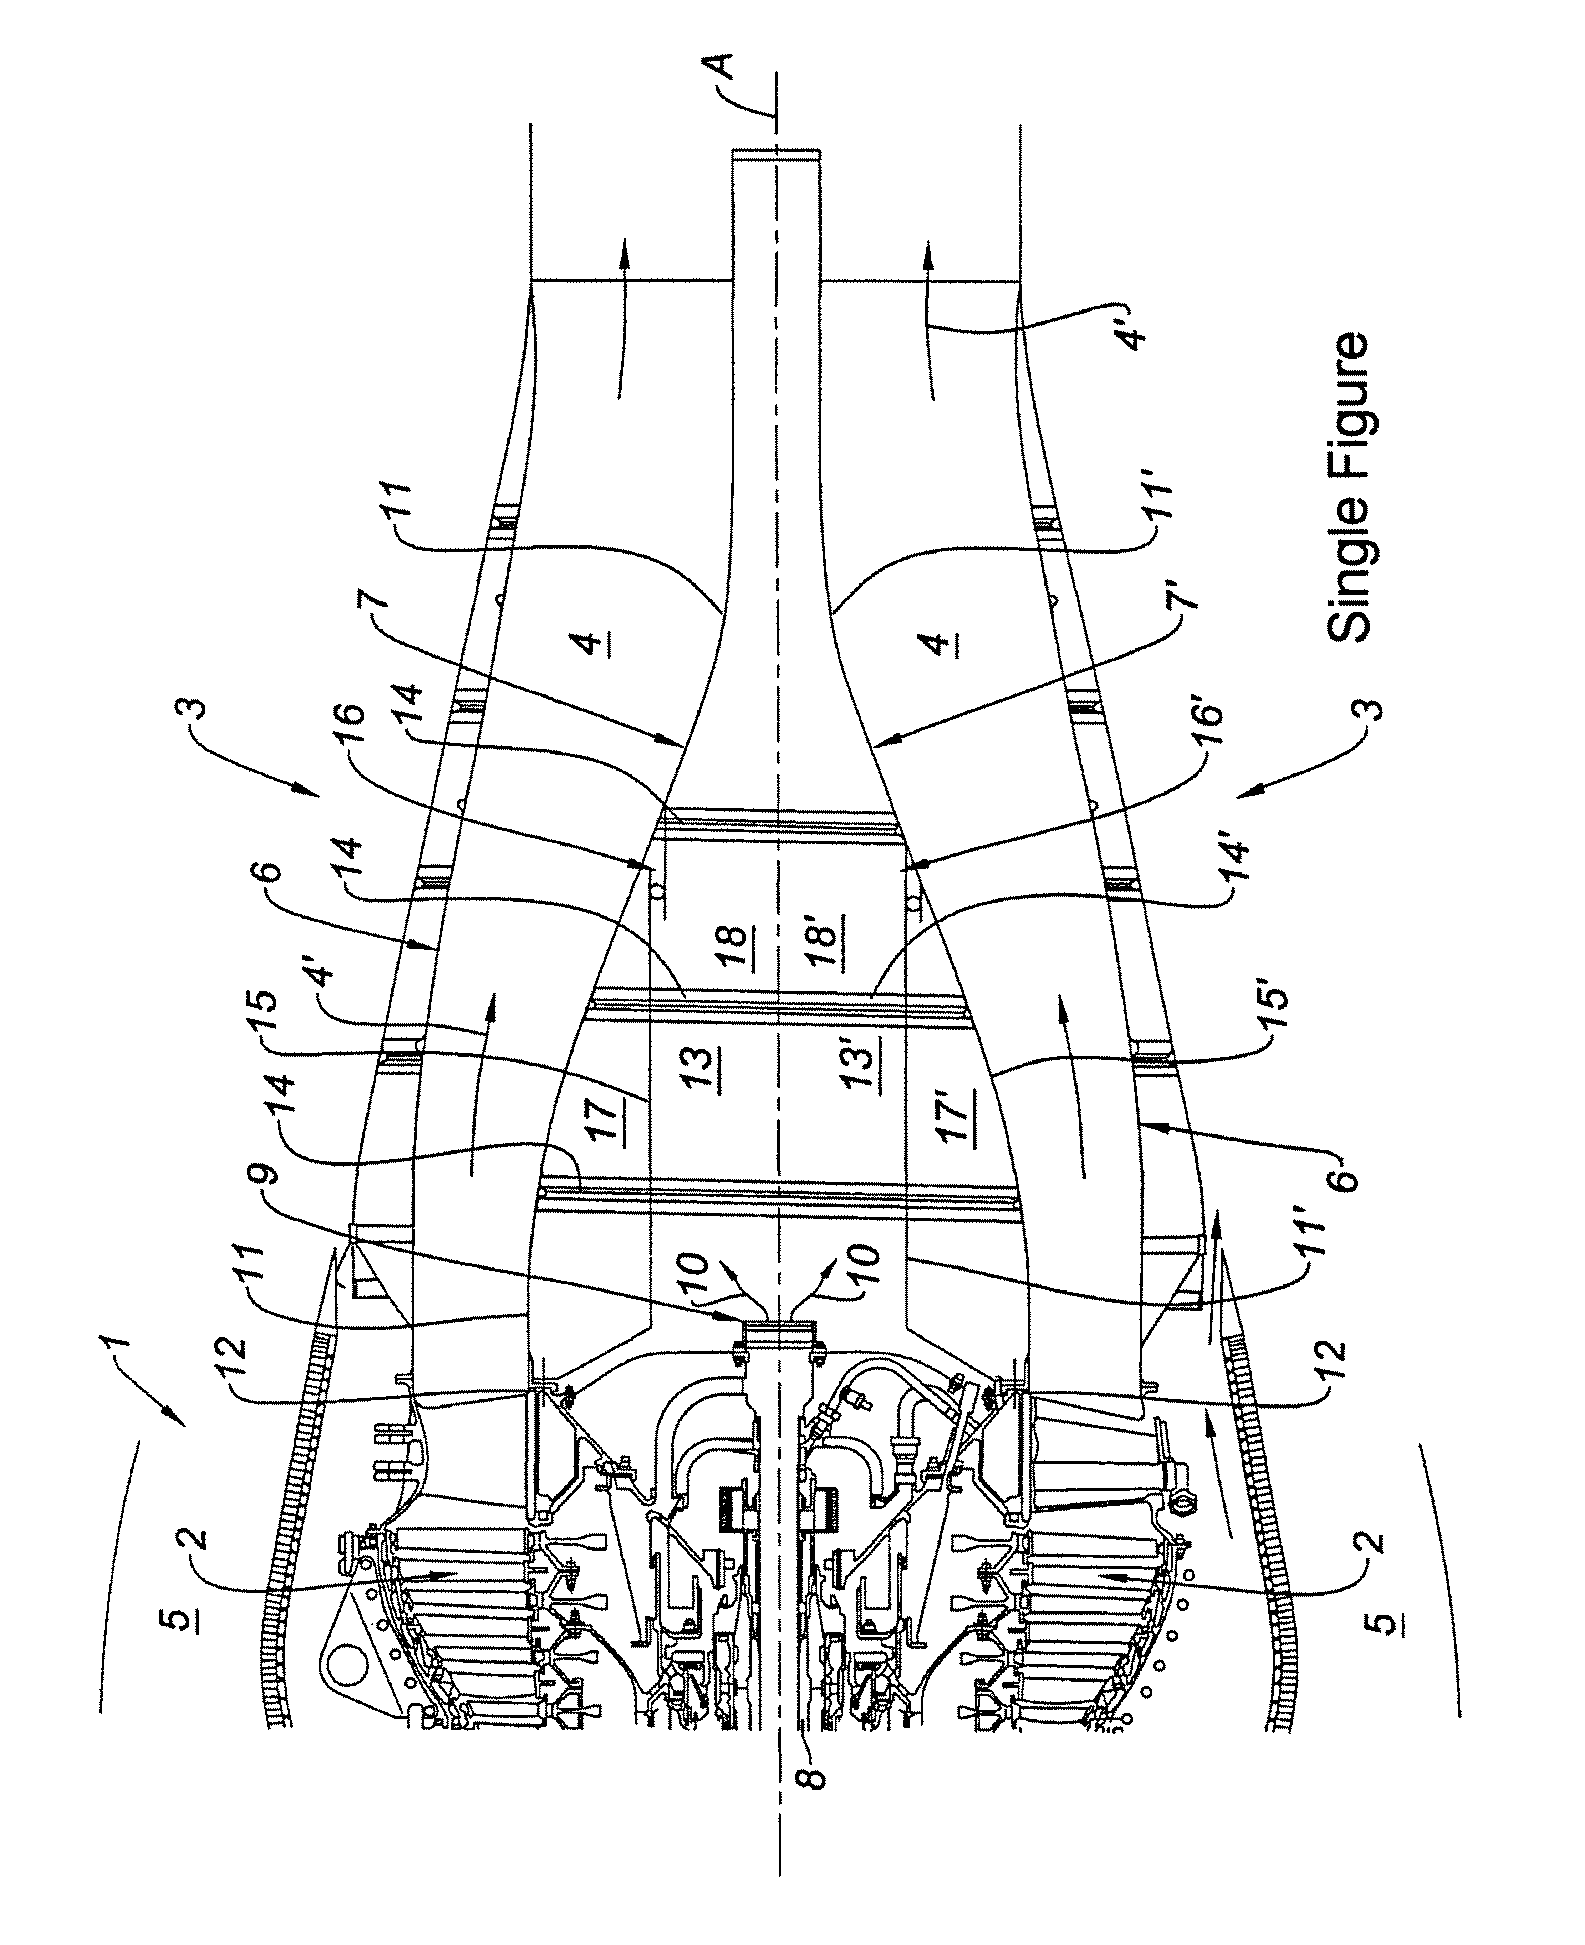 Central body of a turbojet nozzle